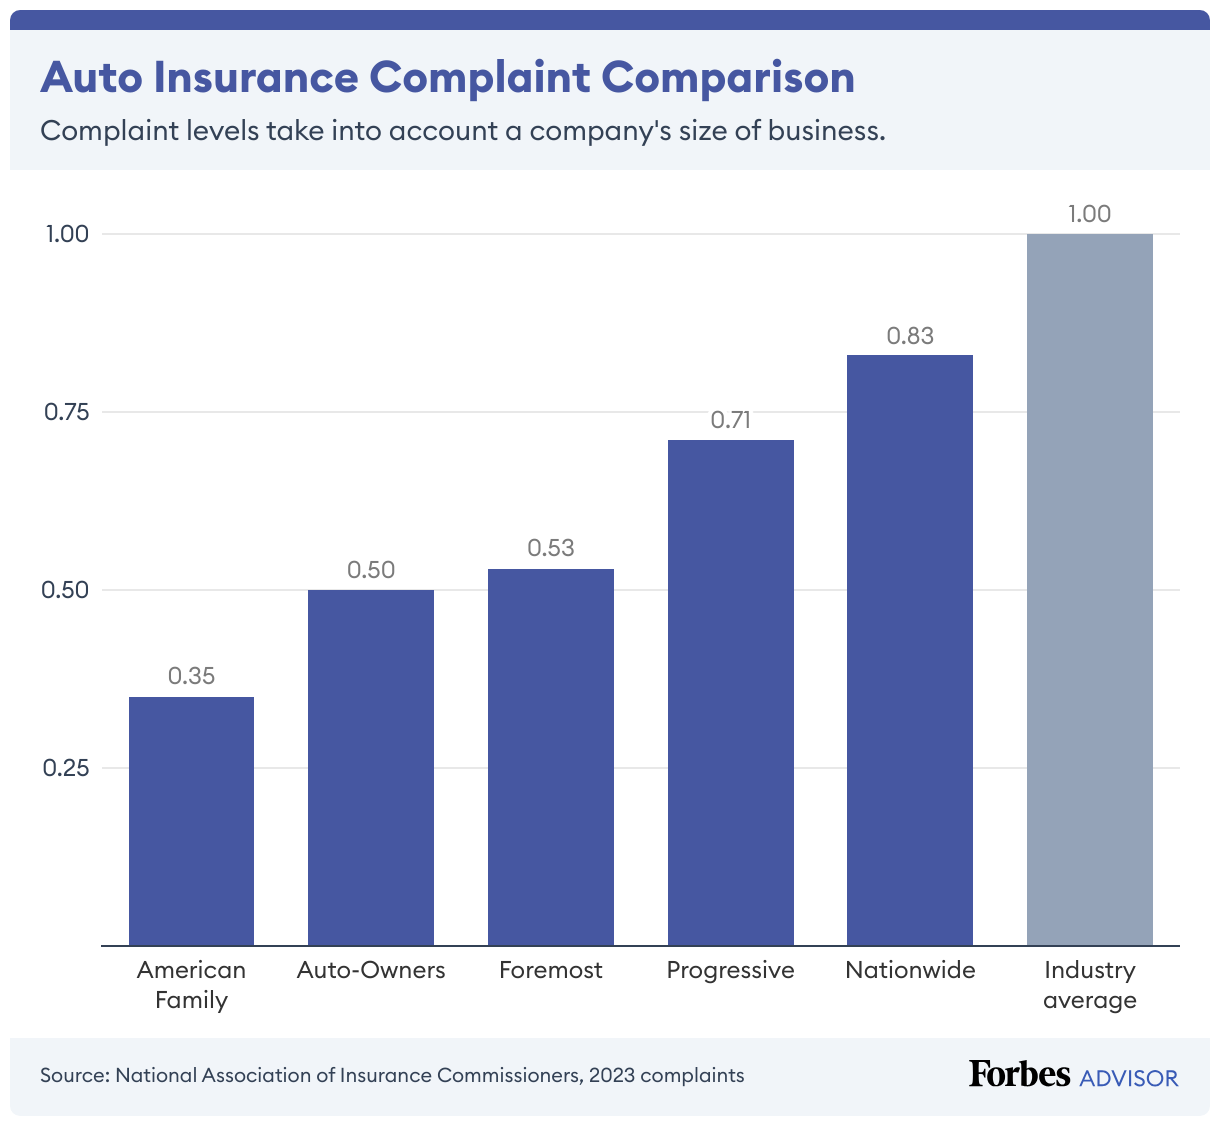 American Family has very low levels of complaints in comparison to Nationwide, which is just a bit below the industry average.